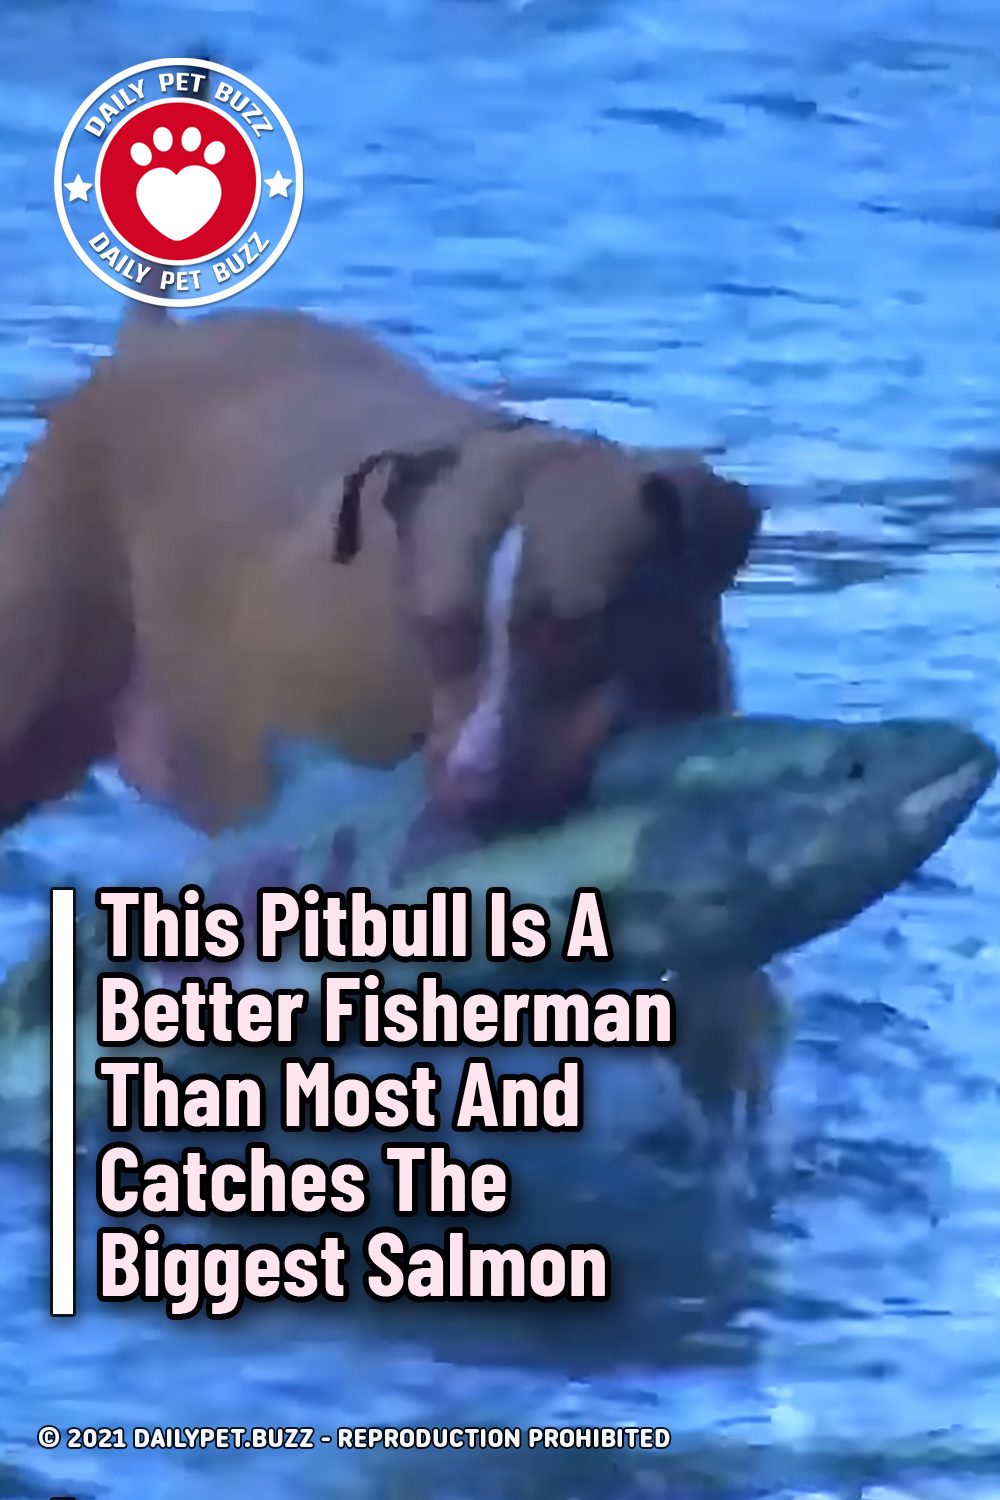 This Pitbull Is A Better Fisherman Than Most And Catches The Biggest Salmon